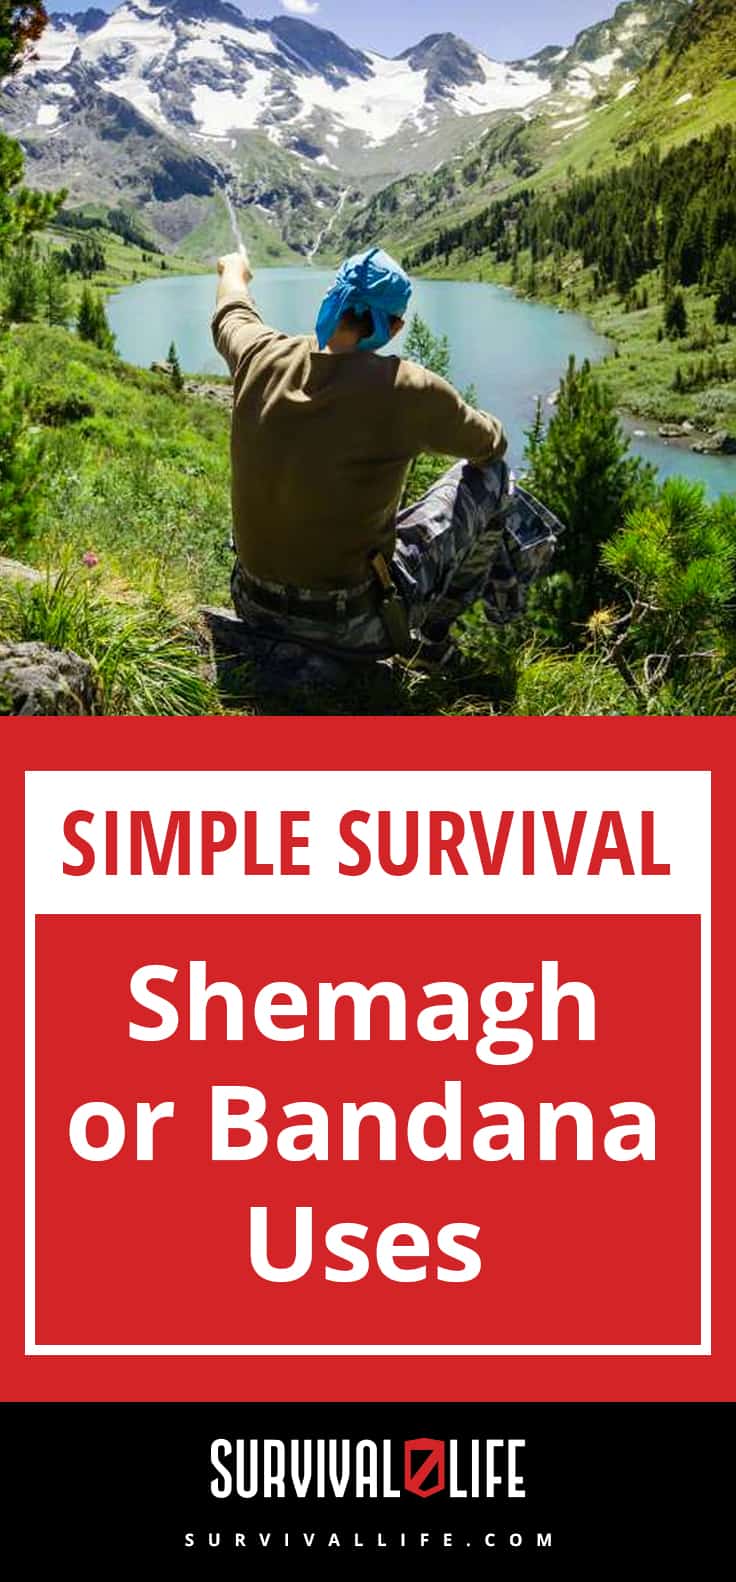 Shemagh or Bandana Uses | Simple Survival